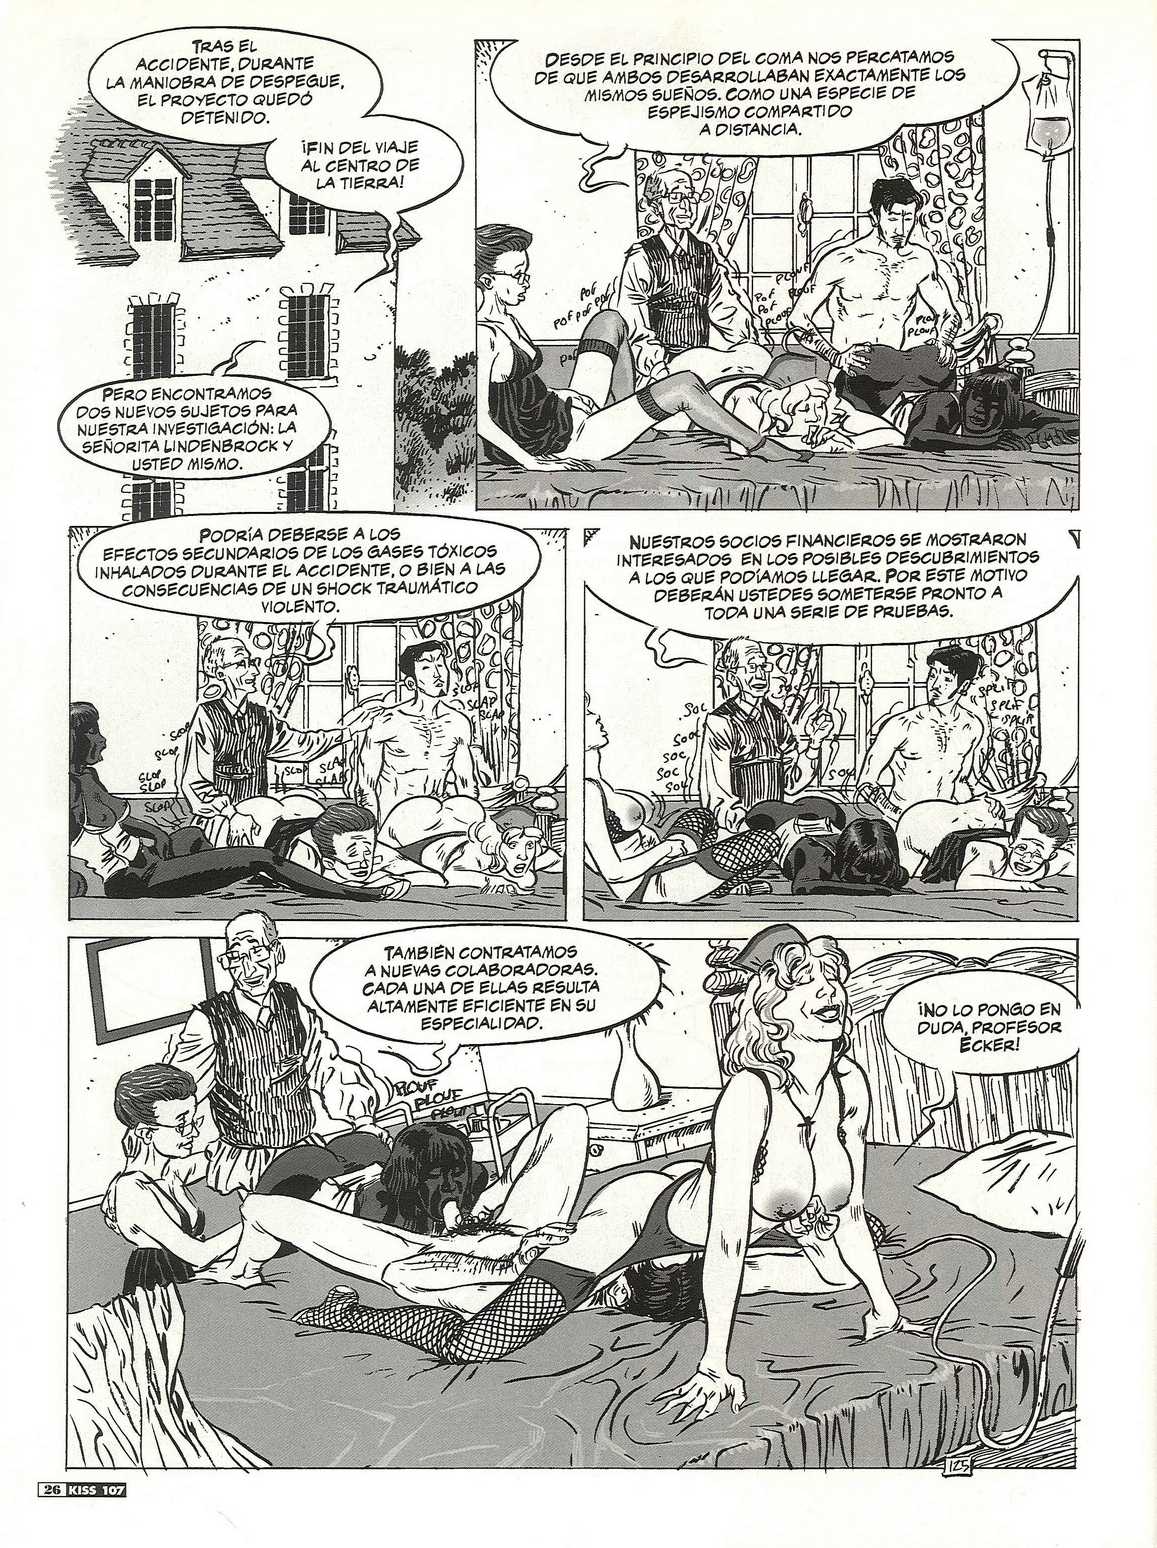 Kiss Comix 107 image number 25